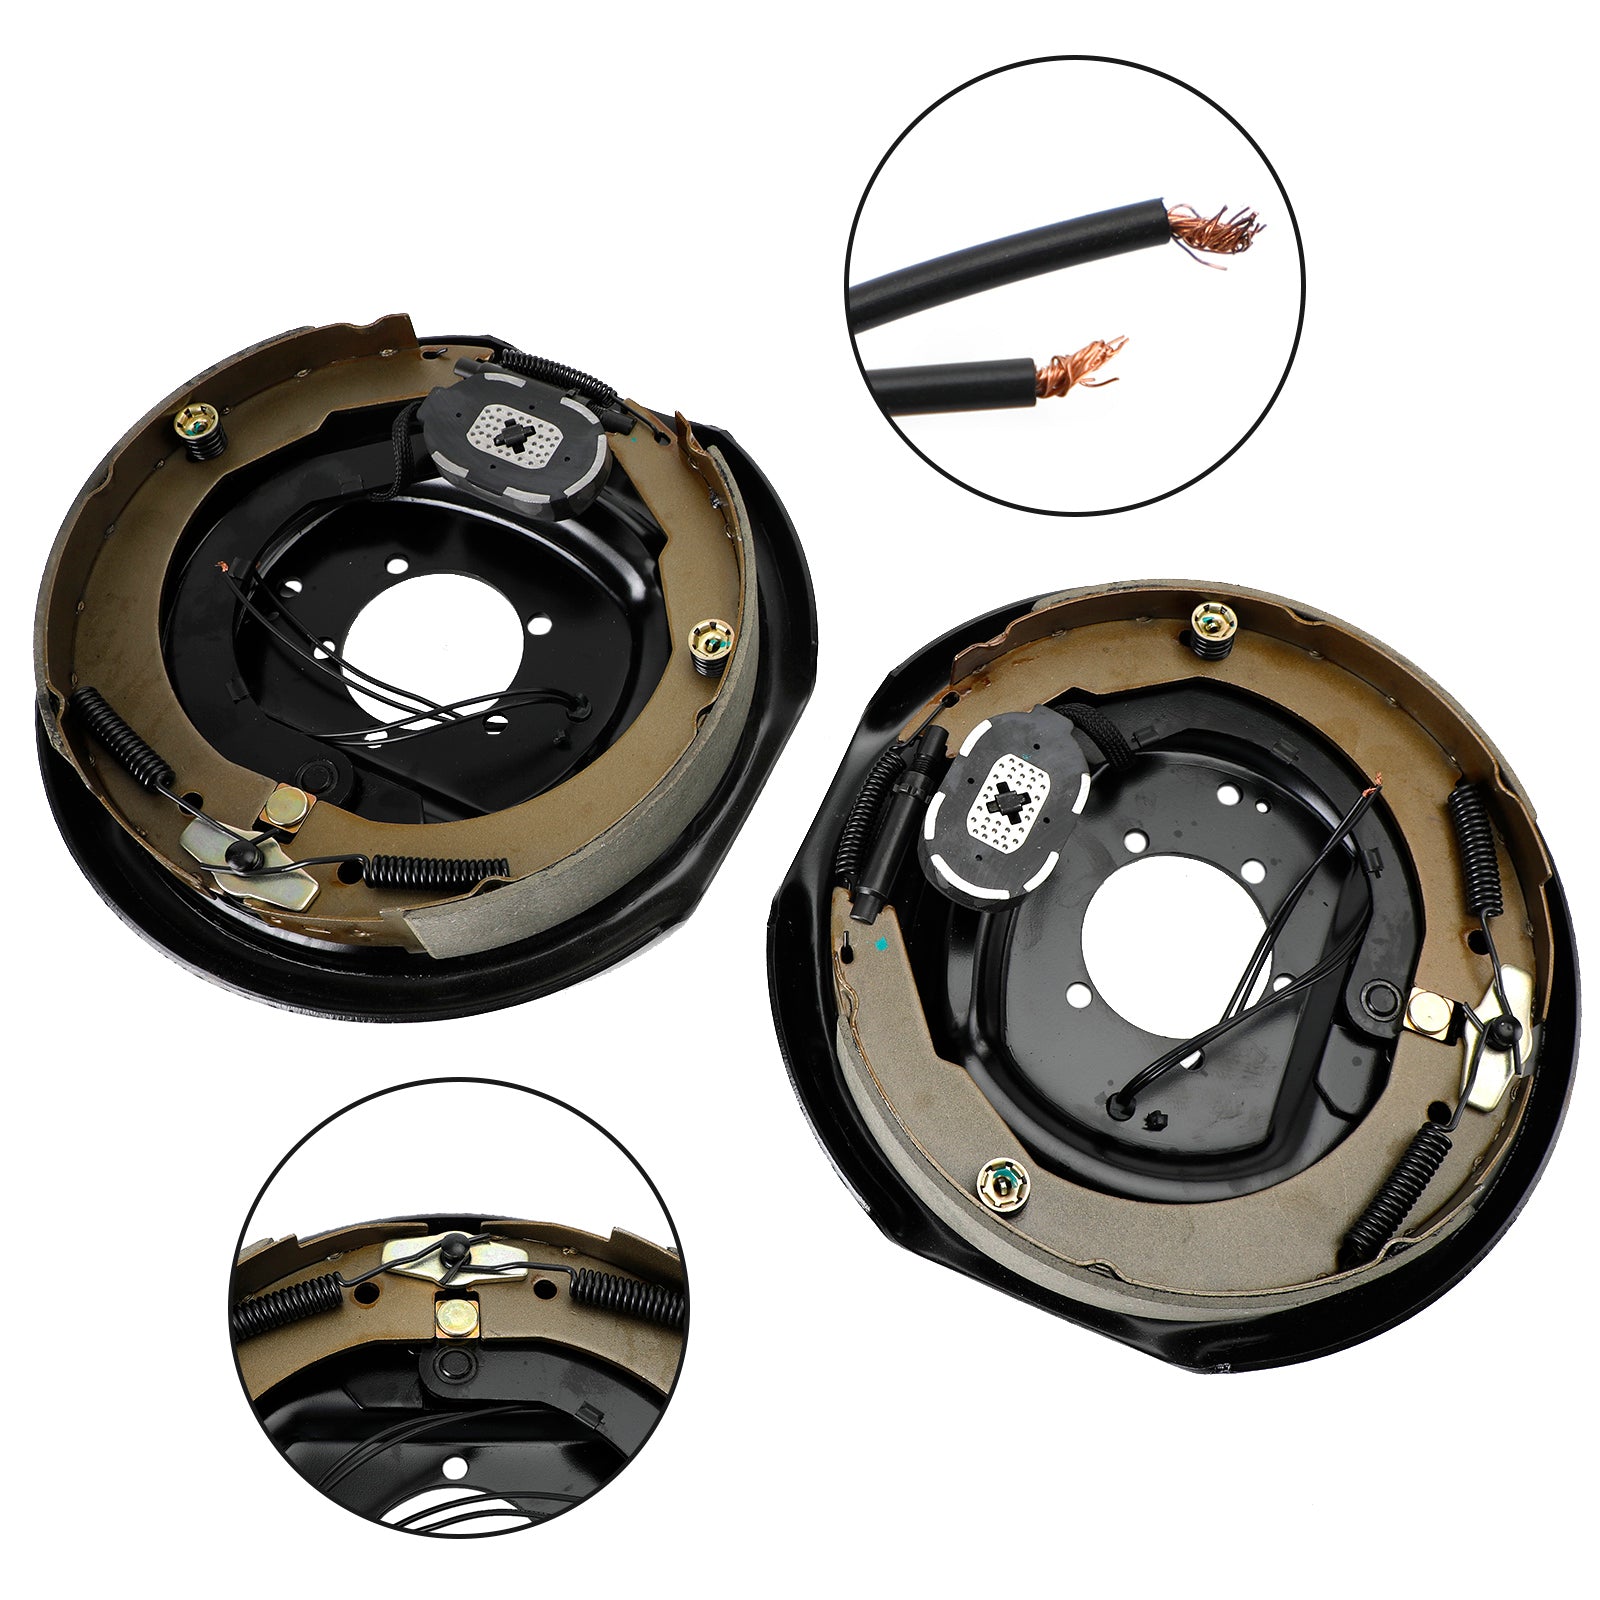 12" Electric Trailer Brake Kit-Left and Right Hand Assemblies-5200 to 7000 lbs